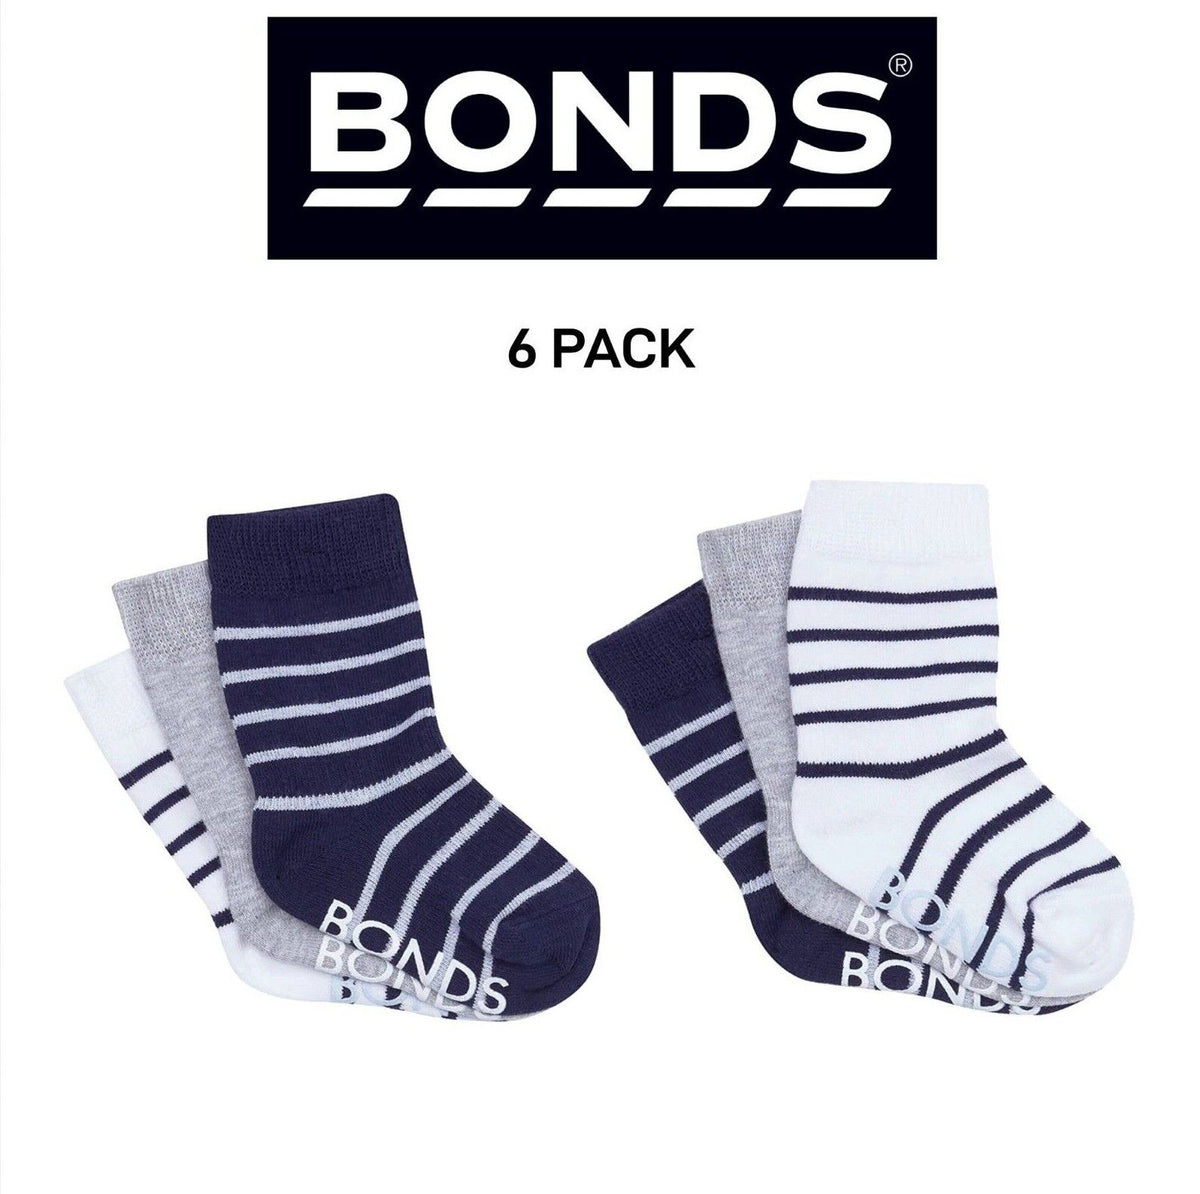 Bonds Baby Stay On Crew Socks with Grippy Soles Breathable Cotton 6 Pack RXQ33N